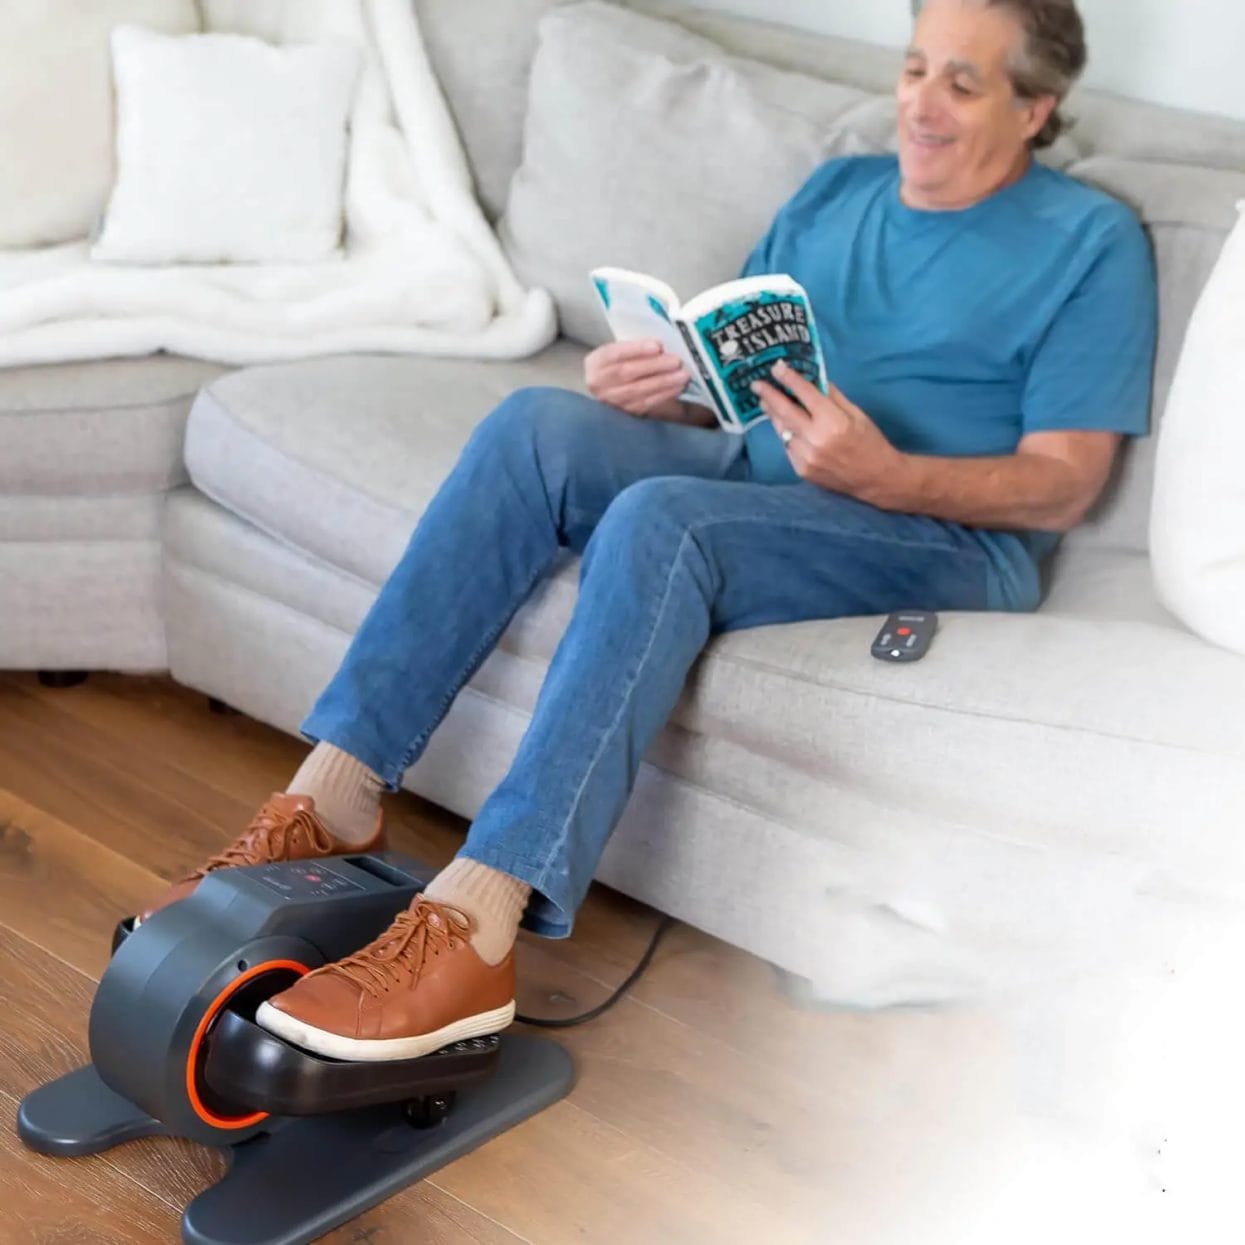 SITFIT, Sit Down and Cycle Compact Elliptical - Foot Pedal Exerciser for Seniors